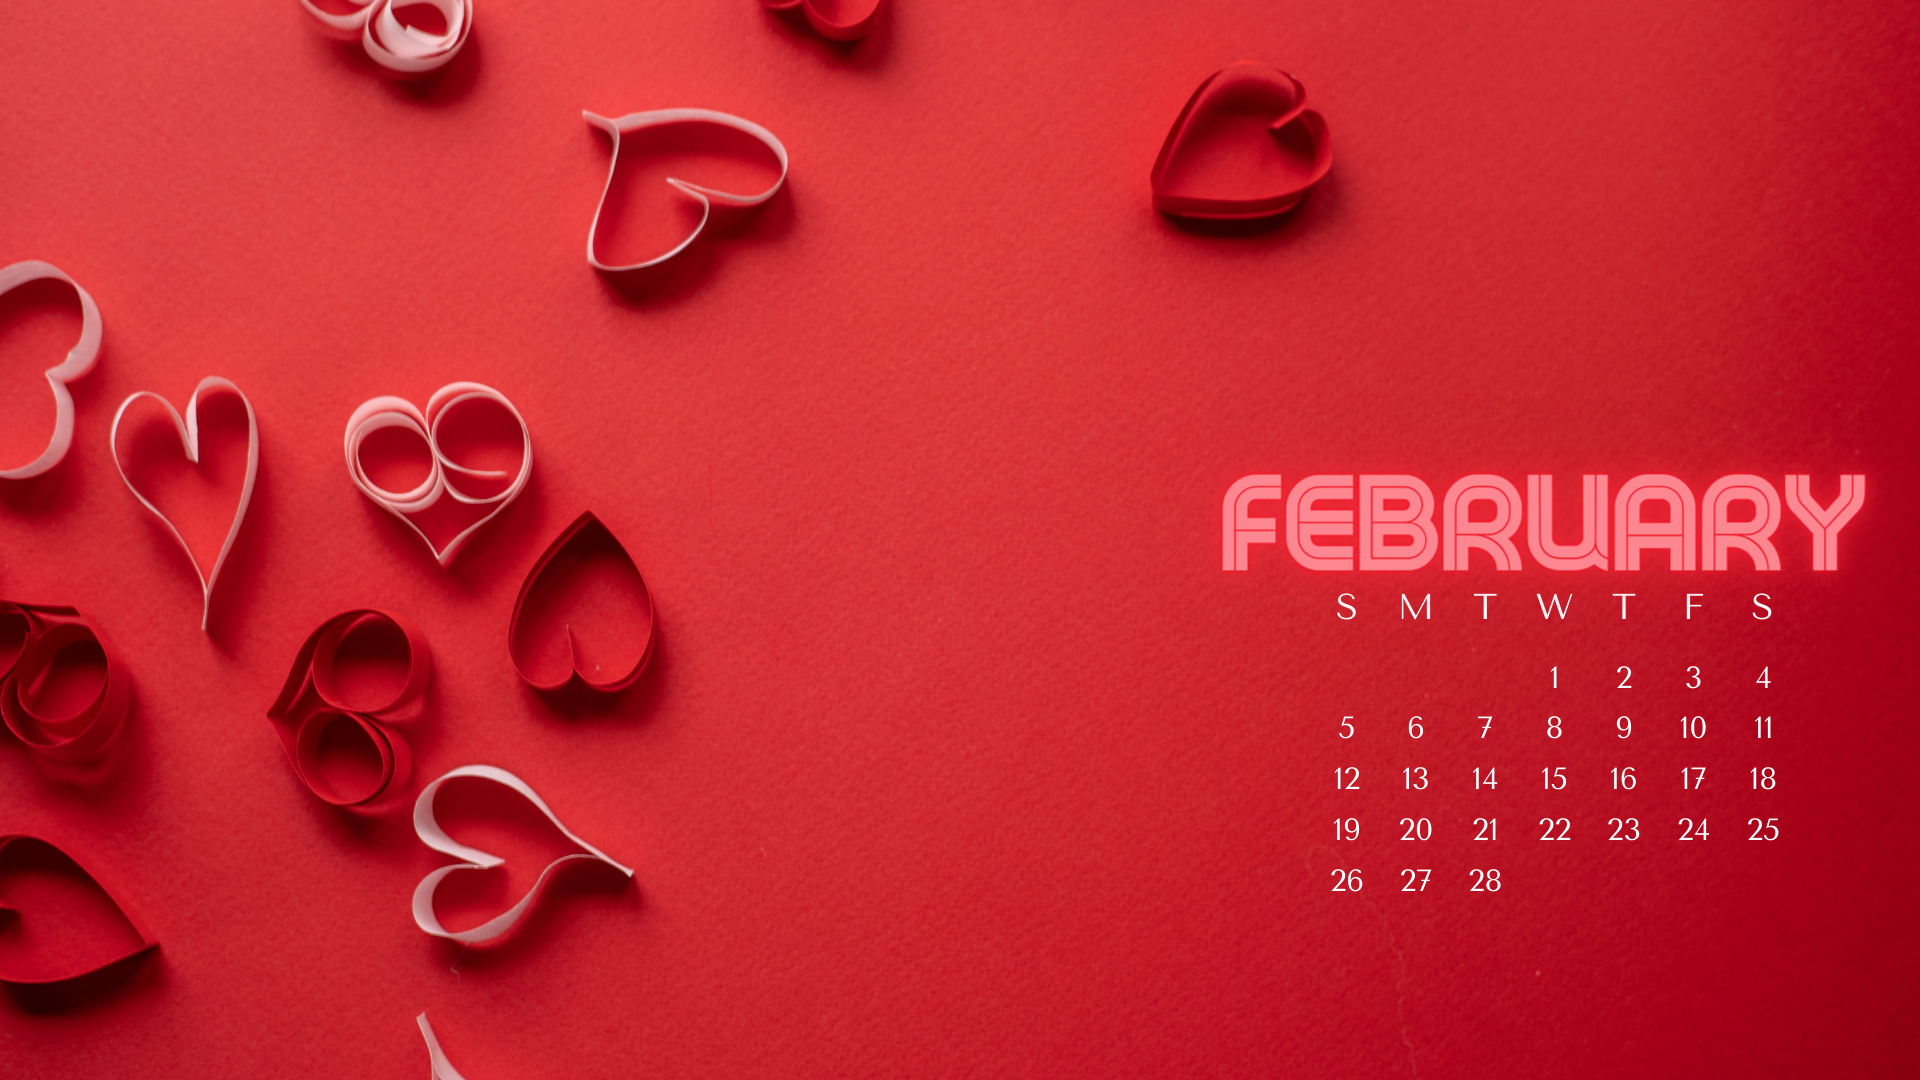 FEBRUARY 2023 desktop calendar backgrounds; Here are your free February backgrounds for computers and laptops. Tech freebies for this month!